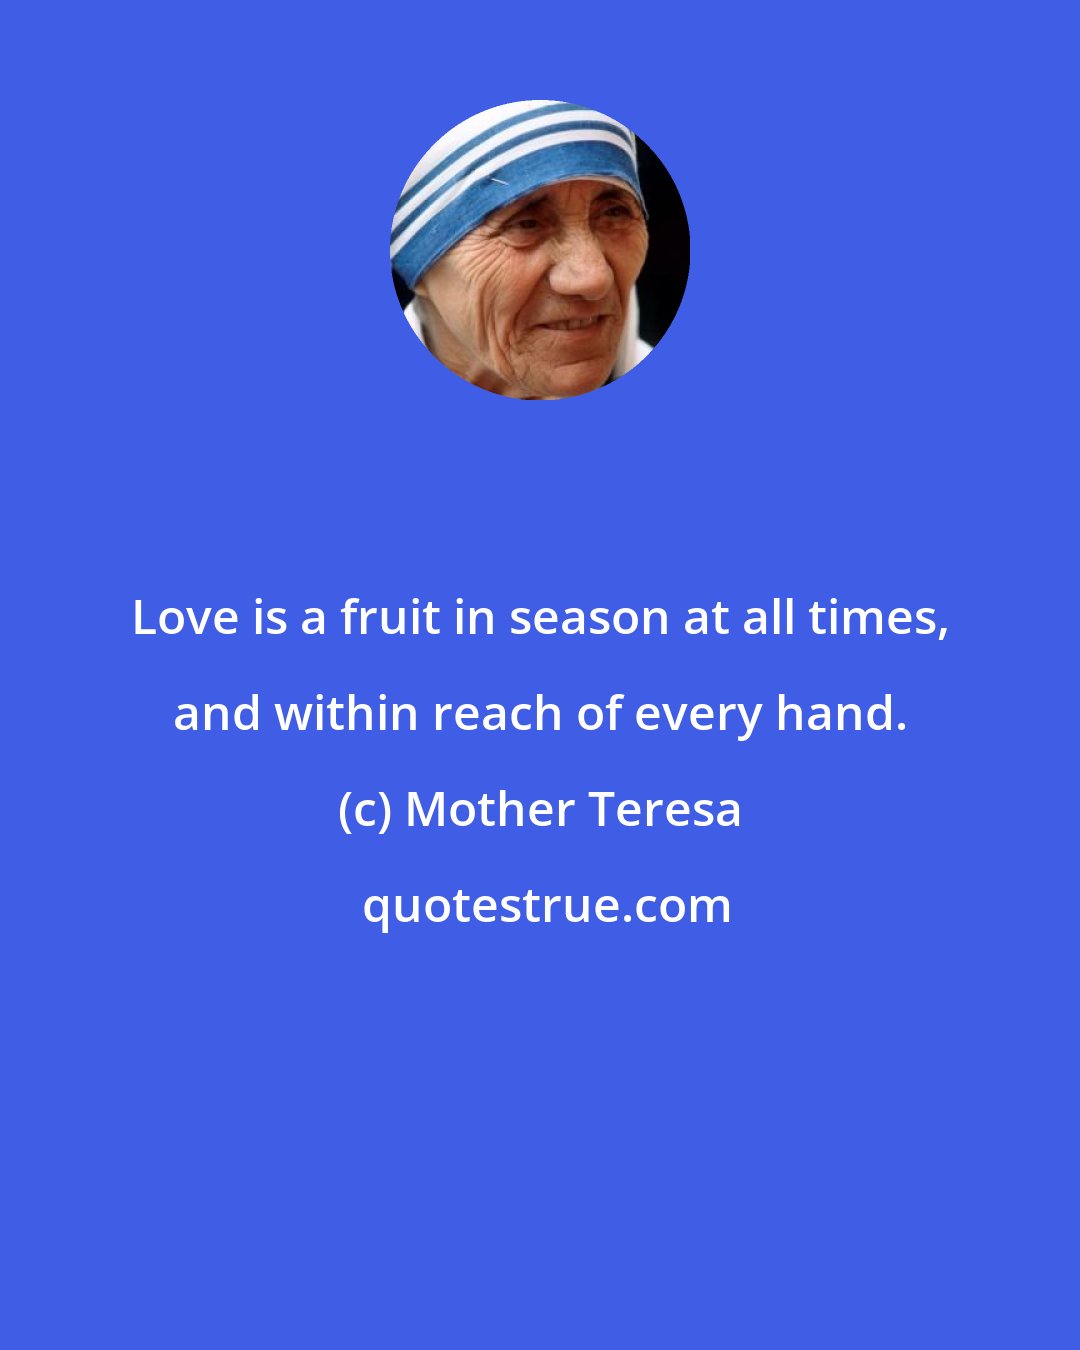 Mother Teresa: Love is a fruit in season at all times, and within reach of every hand.